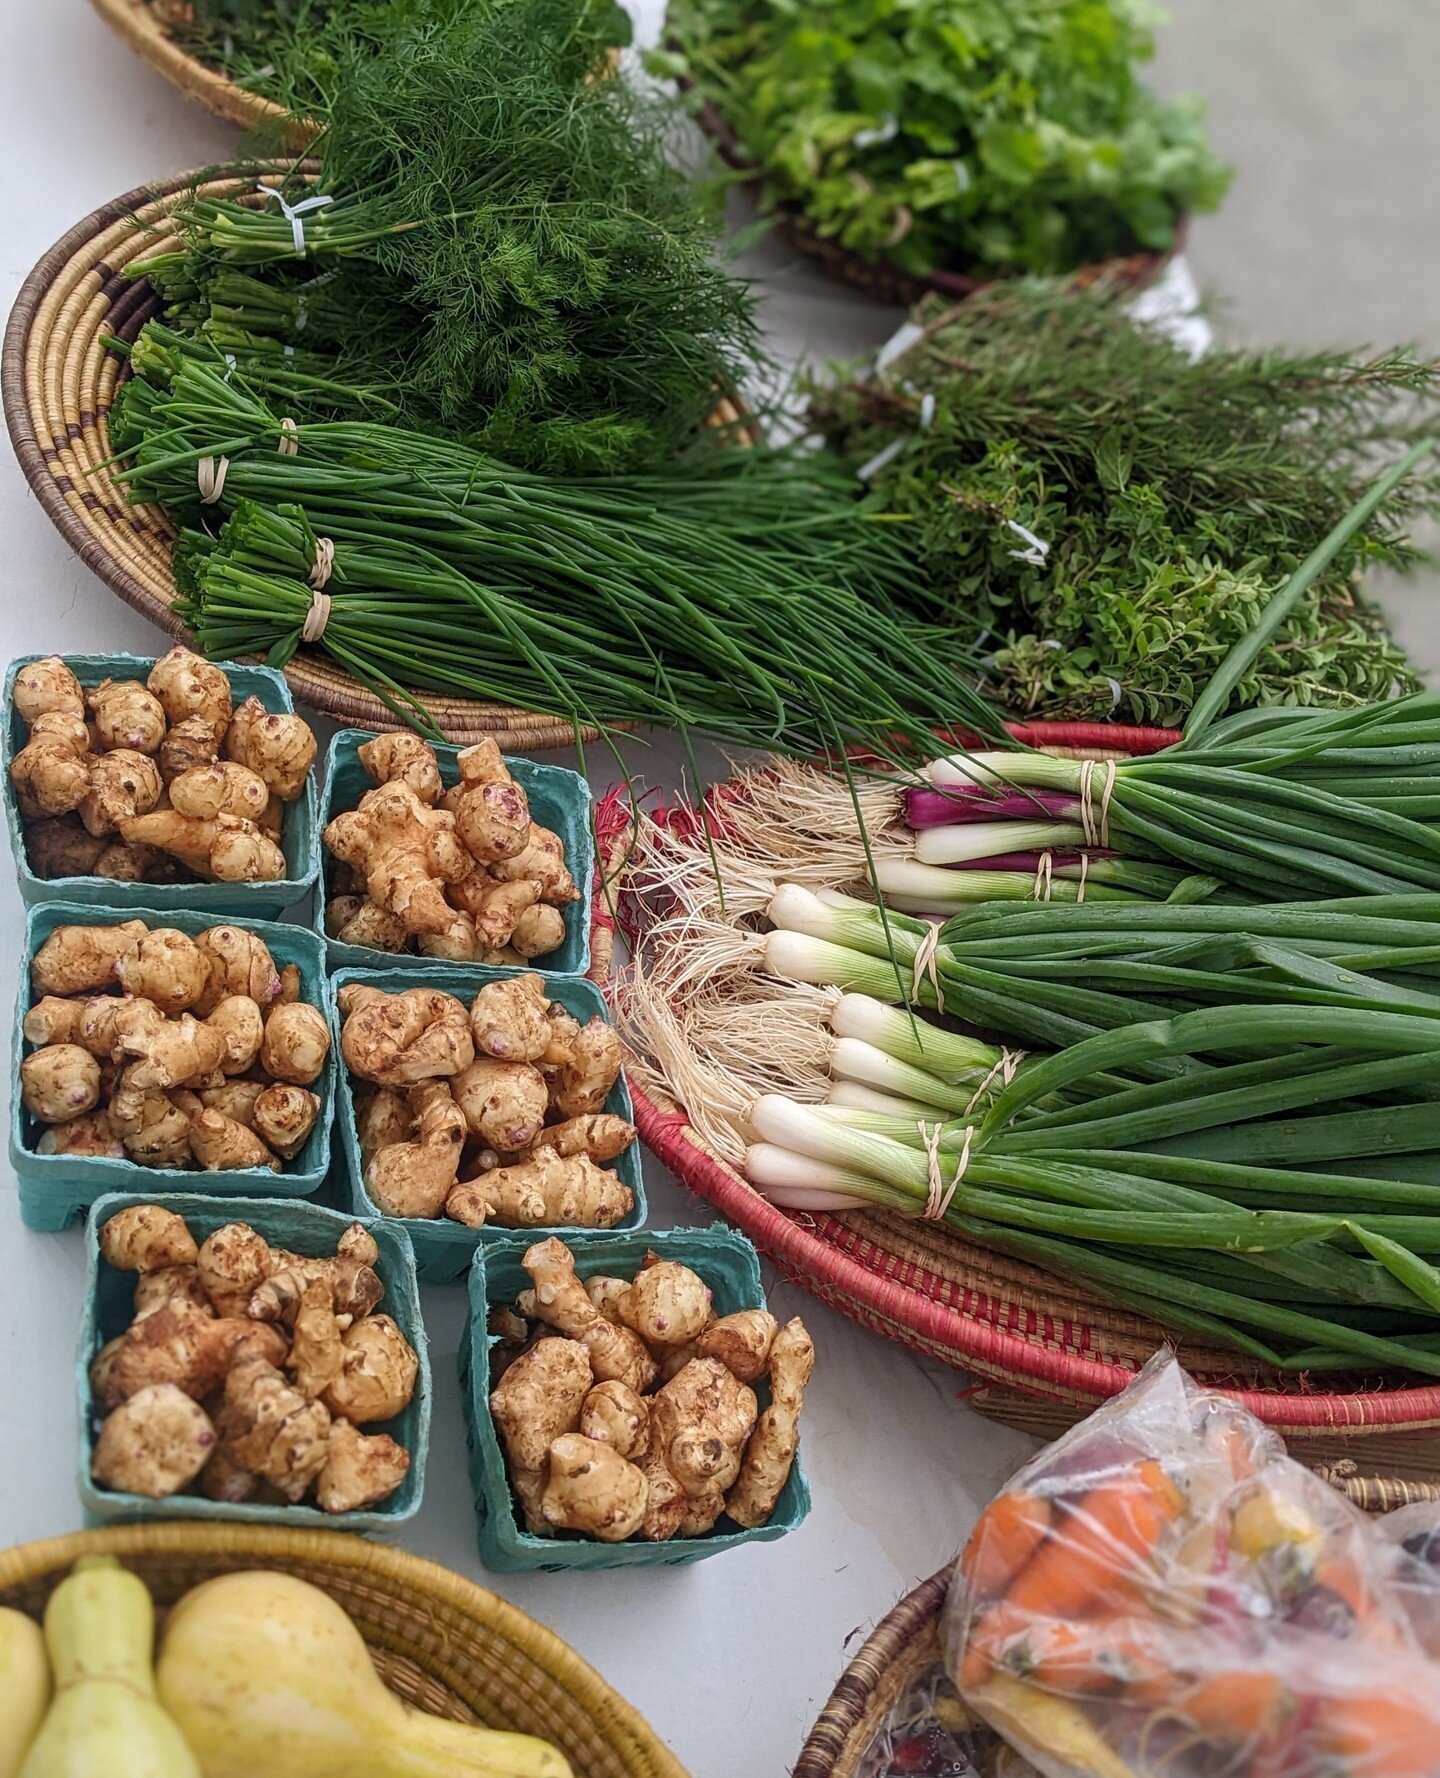 Catch us at Oakhurst Farmer's Market and Piedmont Green Market tomorrow from 9 am- 1 pm and grab all of your fresh veggies and herbs for your week! ⁠
⁠
P.S. The Farm is taking a few days off next week, so this is the last market we're doing before th